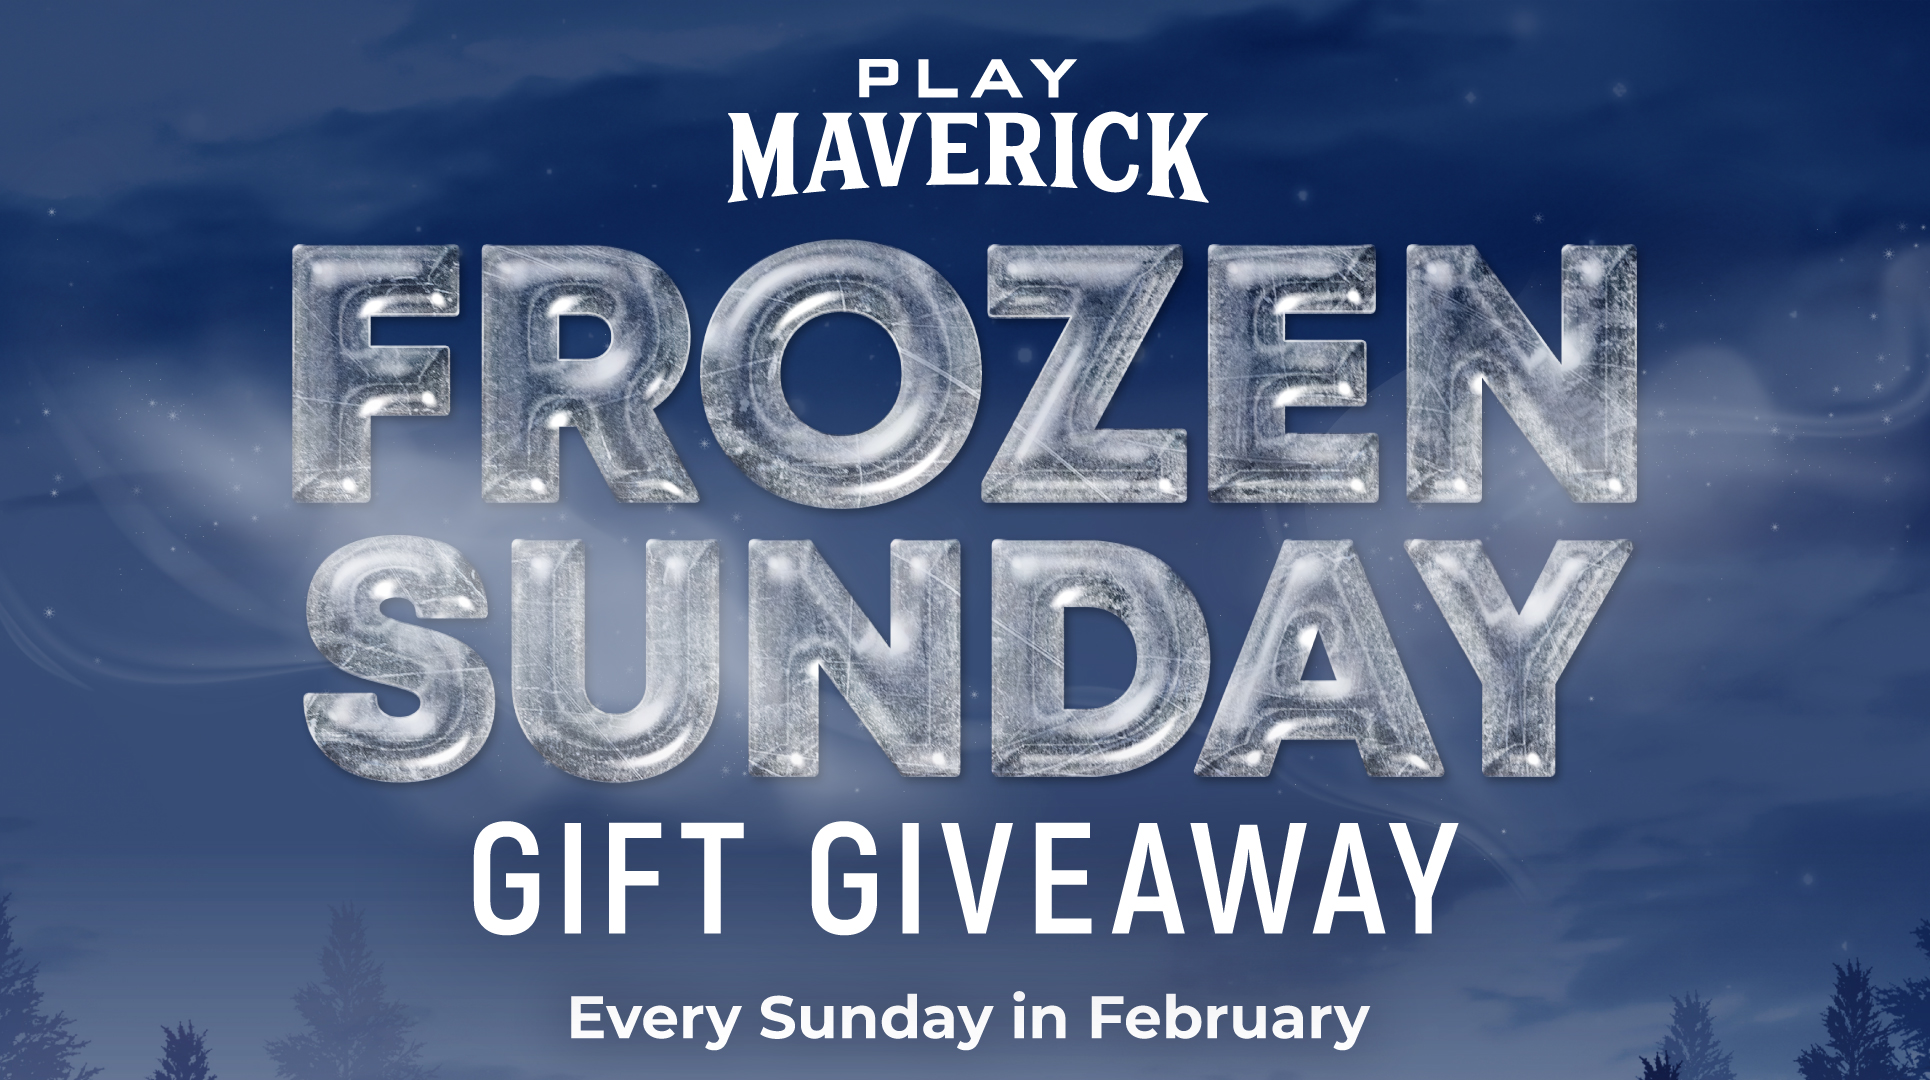 Frozen Sunday Gift Giveaway Every Sunday in February Beat the Chill with Winterful gear! Redeem voucher between 1pm - 7pm at the Promotions Center. Feb 5: Sweatshirt Feb 12: Scarf Feb 19: Blanket Feb 26: Hat